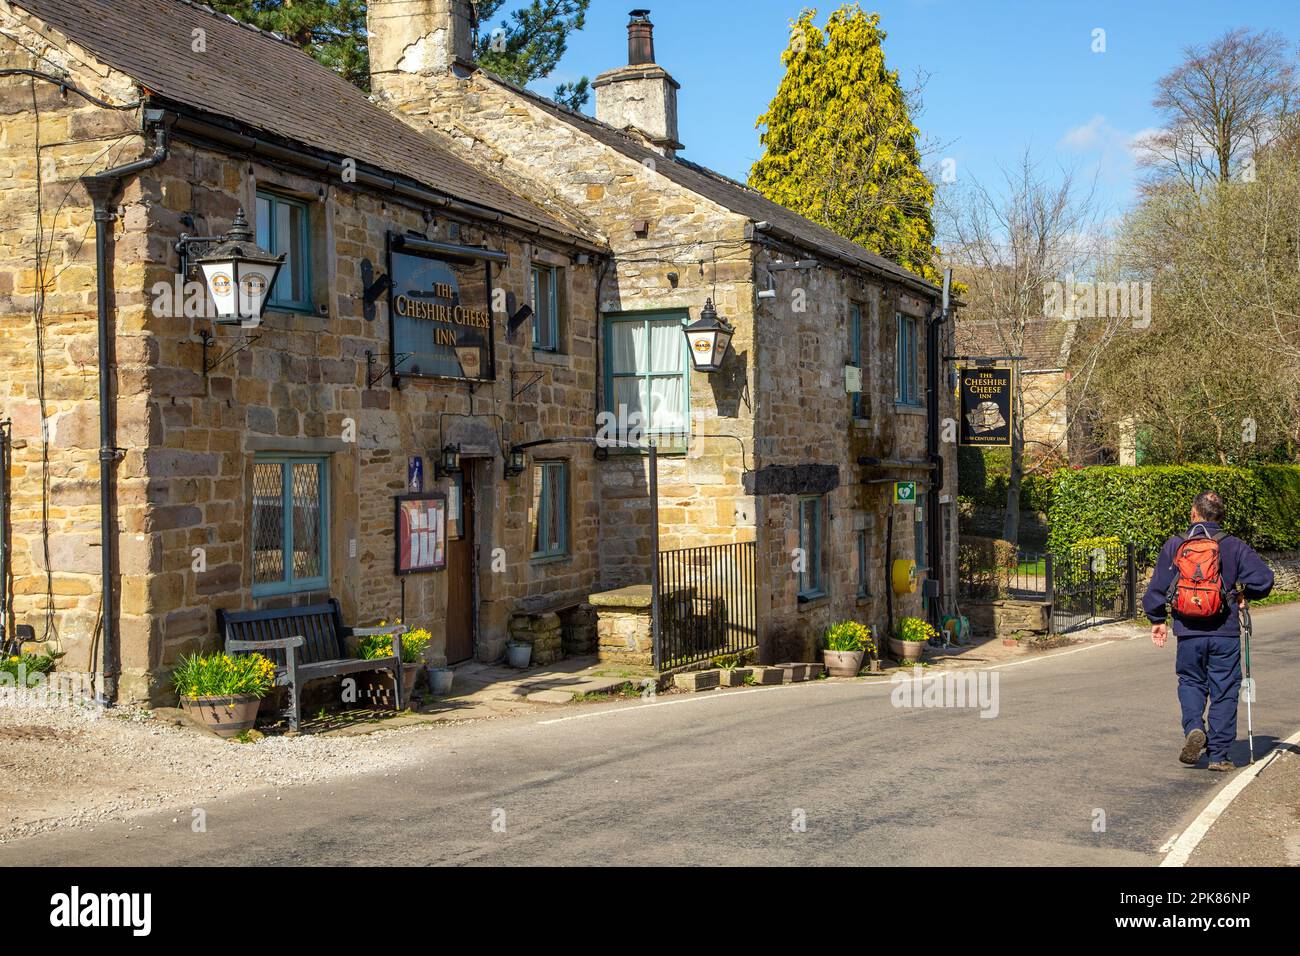 Man  backpacking past the old traditional coaching inn the Cheshire Cheese in the Derbyshire village of Hope at the foot of the great ridge to Mam Tor Stock Photo